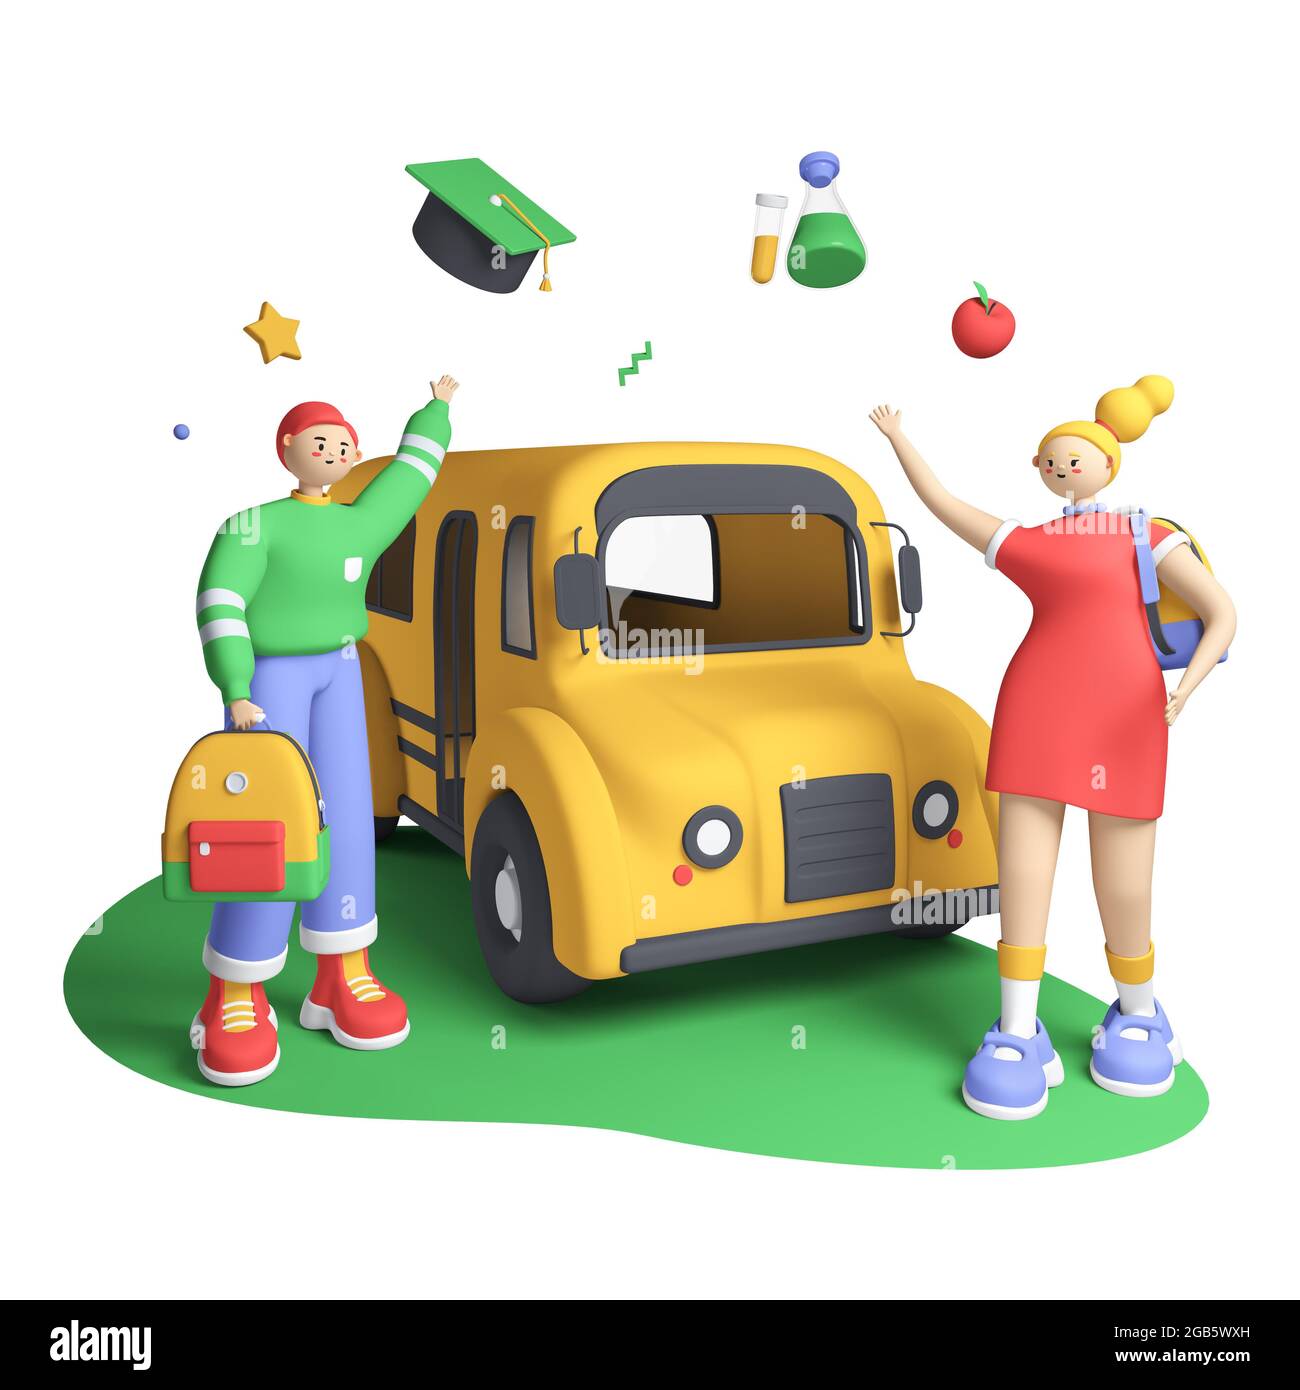 Meeting at the school bus - colorful 3D style illustration. Boy and girl students or pupils greet each other. Start of classes and new educational yea Stock Photo